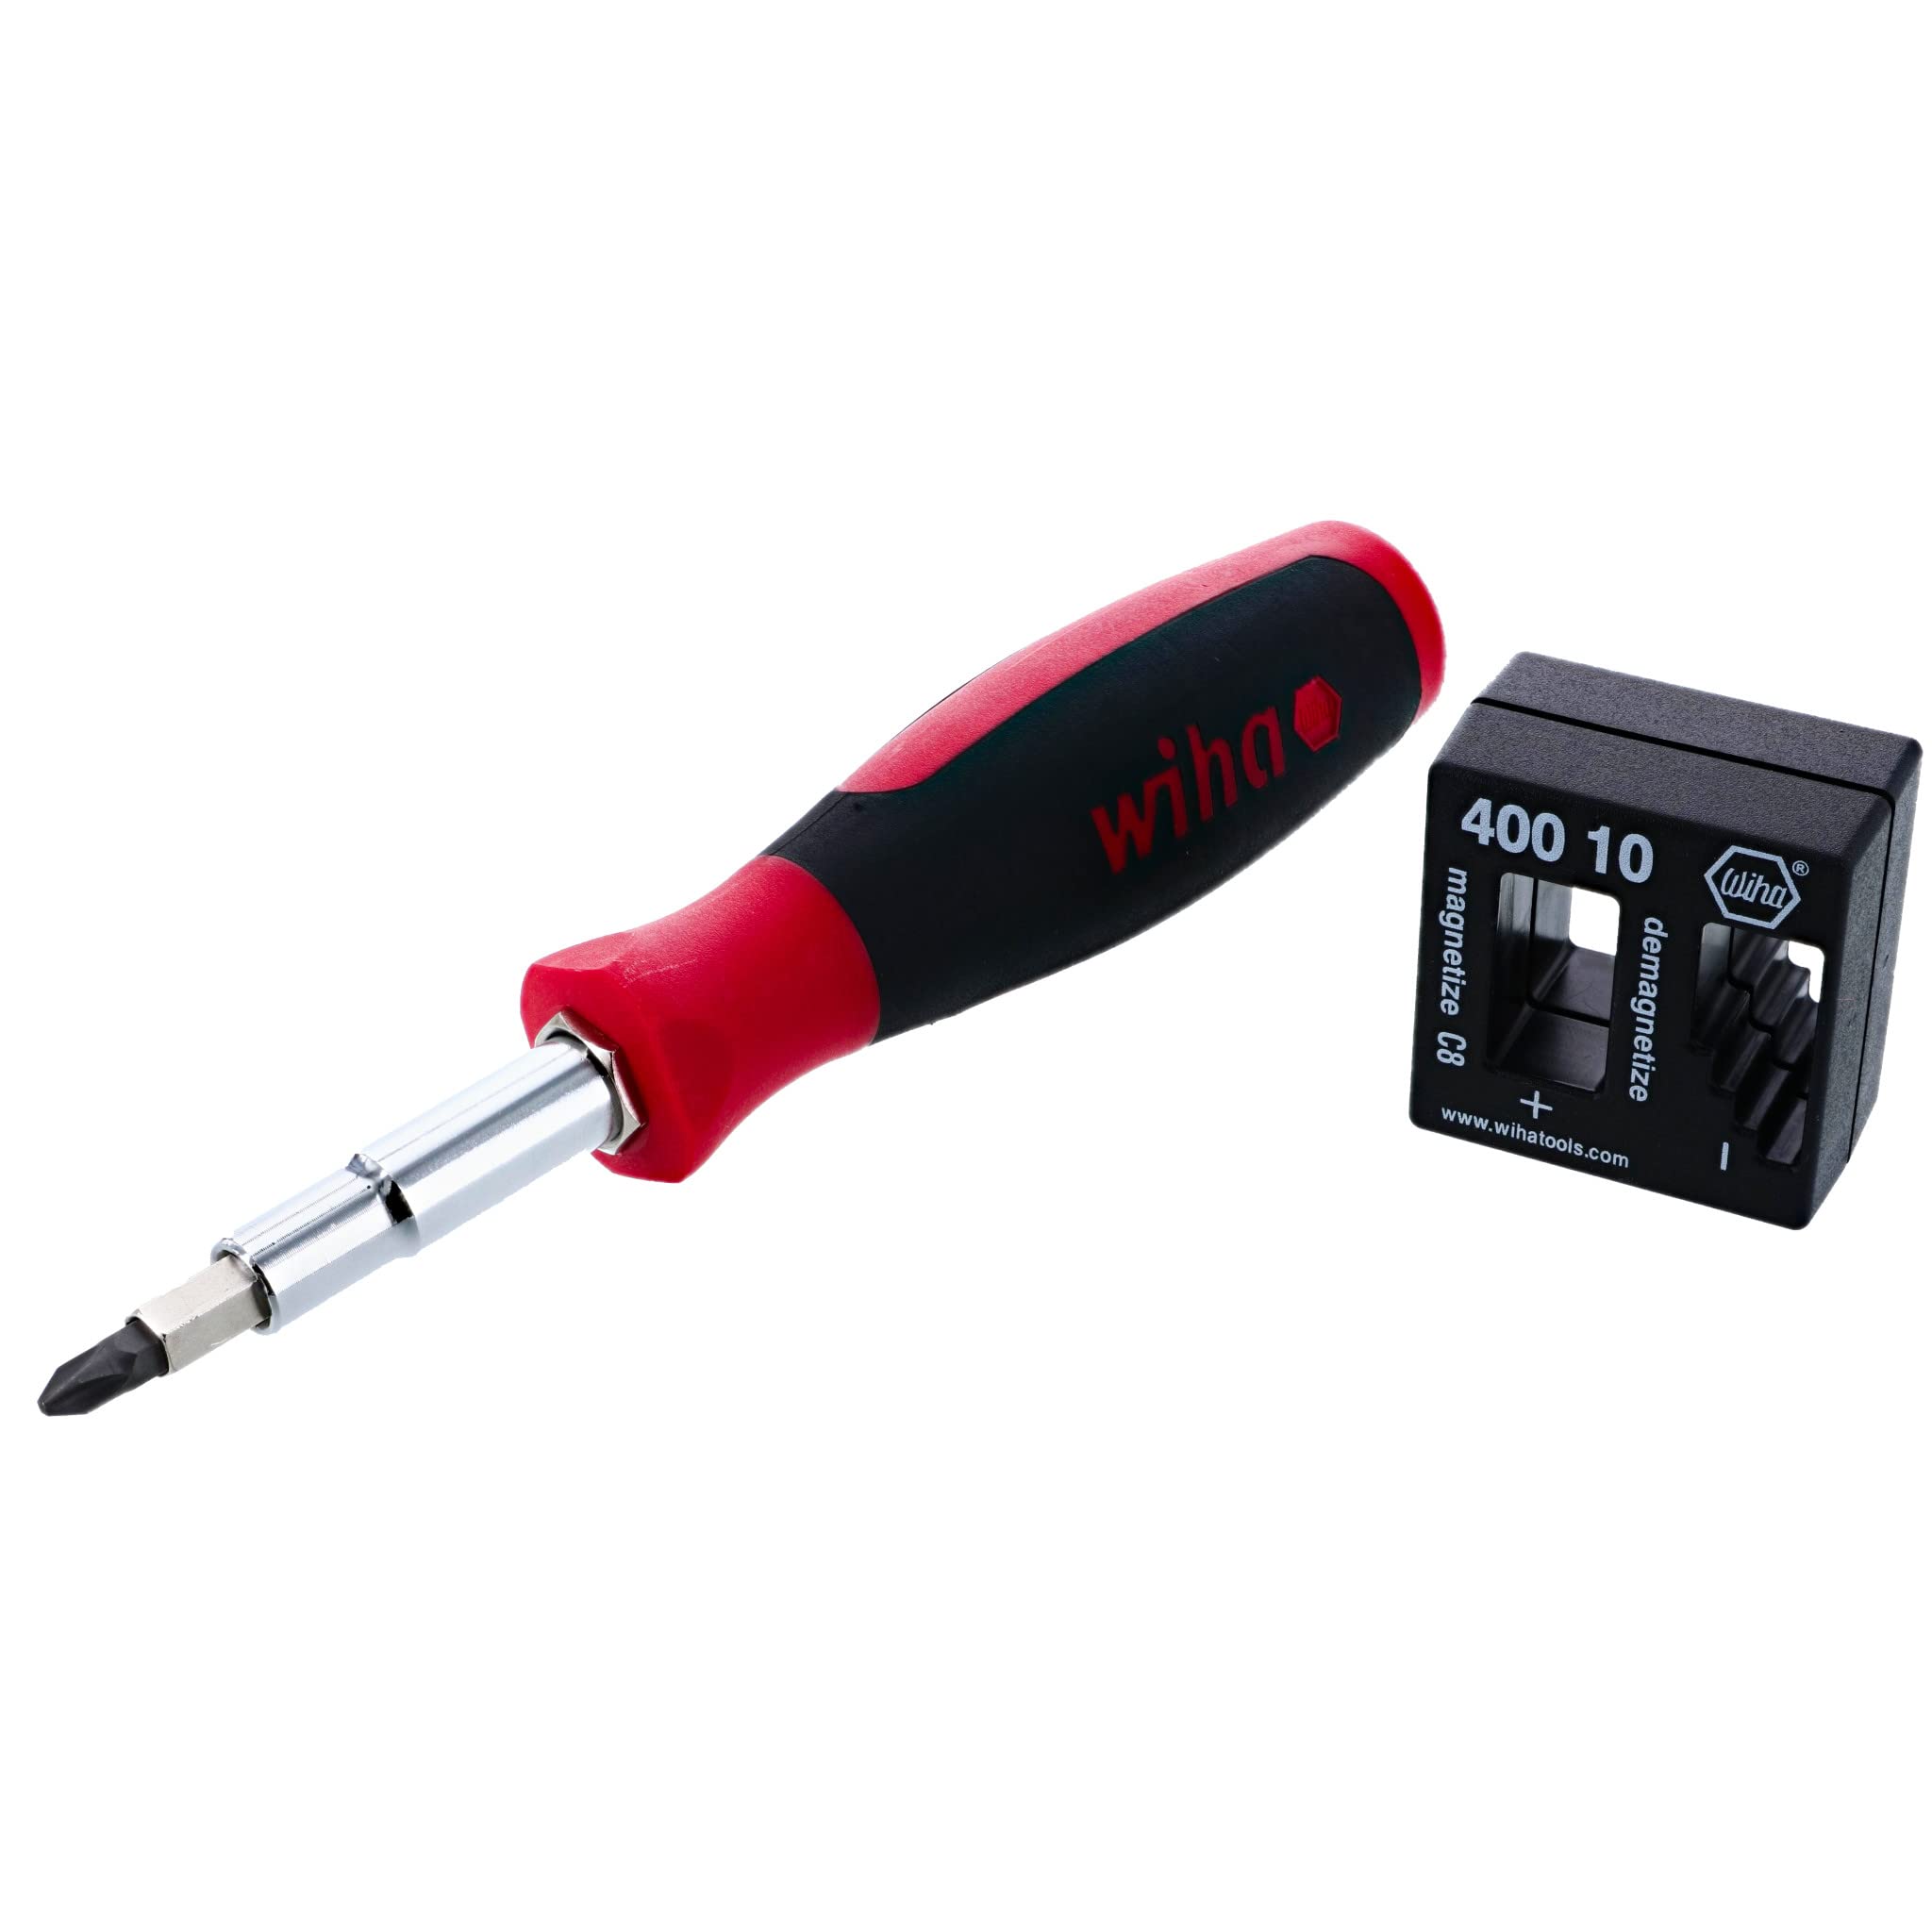 Wiha 77877 11inOne Multi-Driver with Magnetizer Demagnetizer Set $15